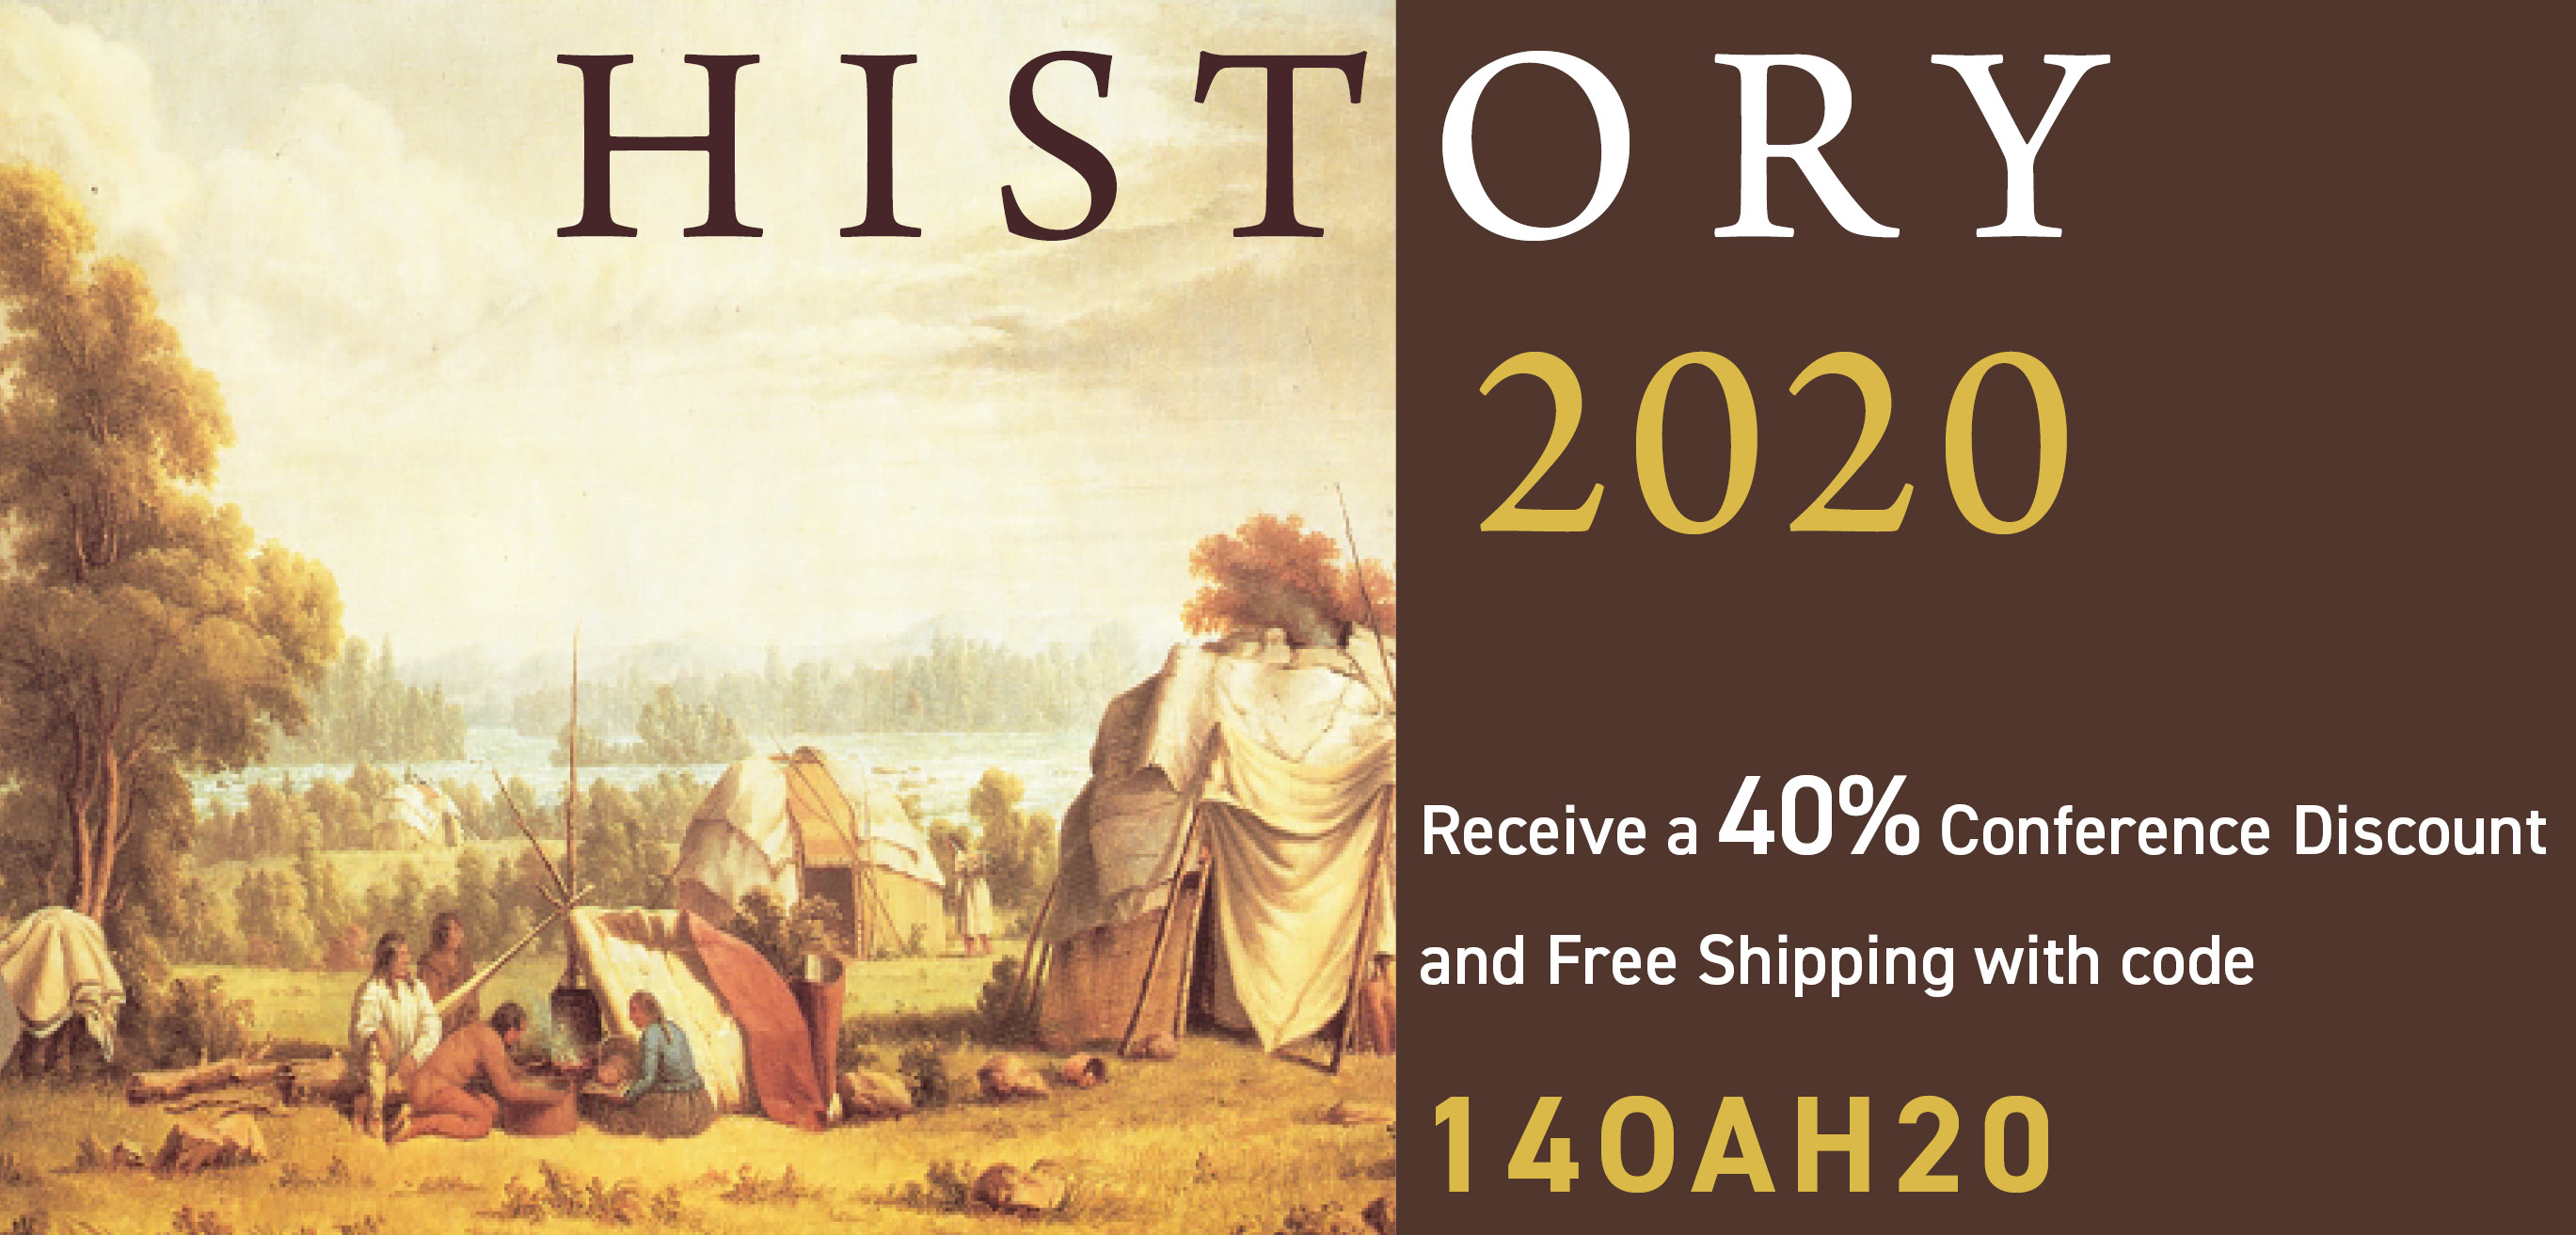 Ad-History 2020 Recieve a 40% Conference Discount and Free Shipping with Code 14OAH20